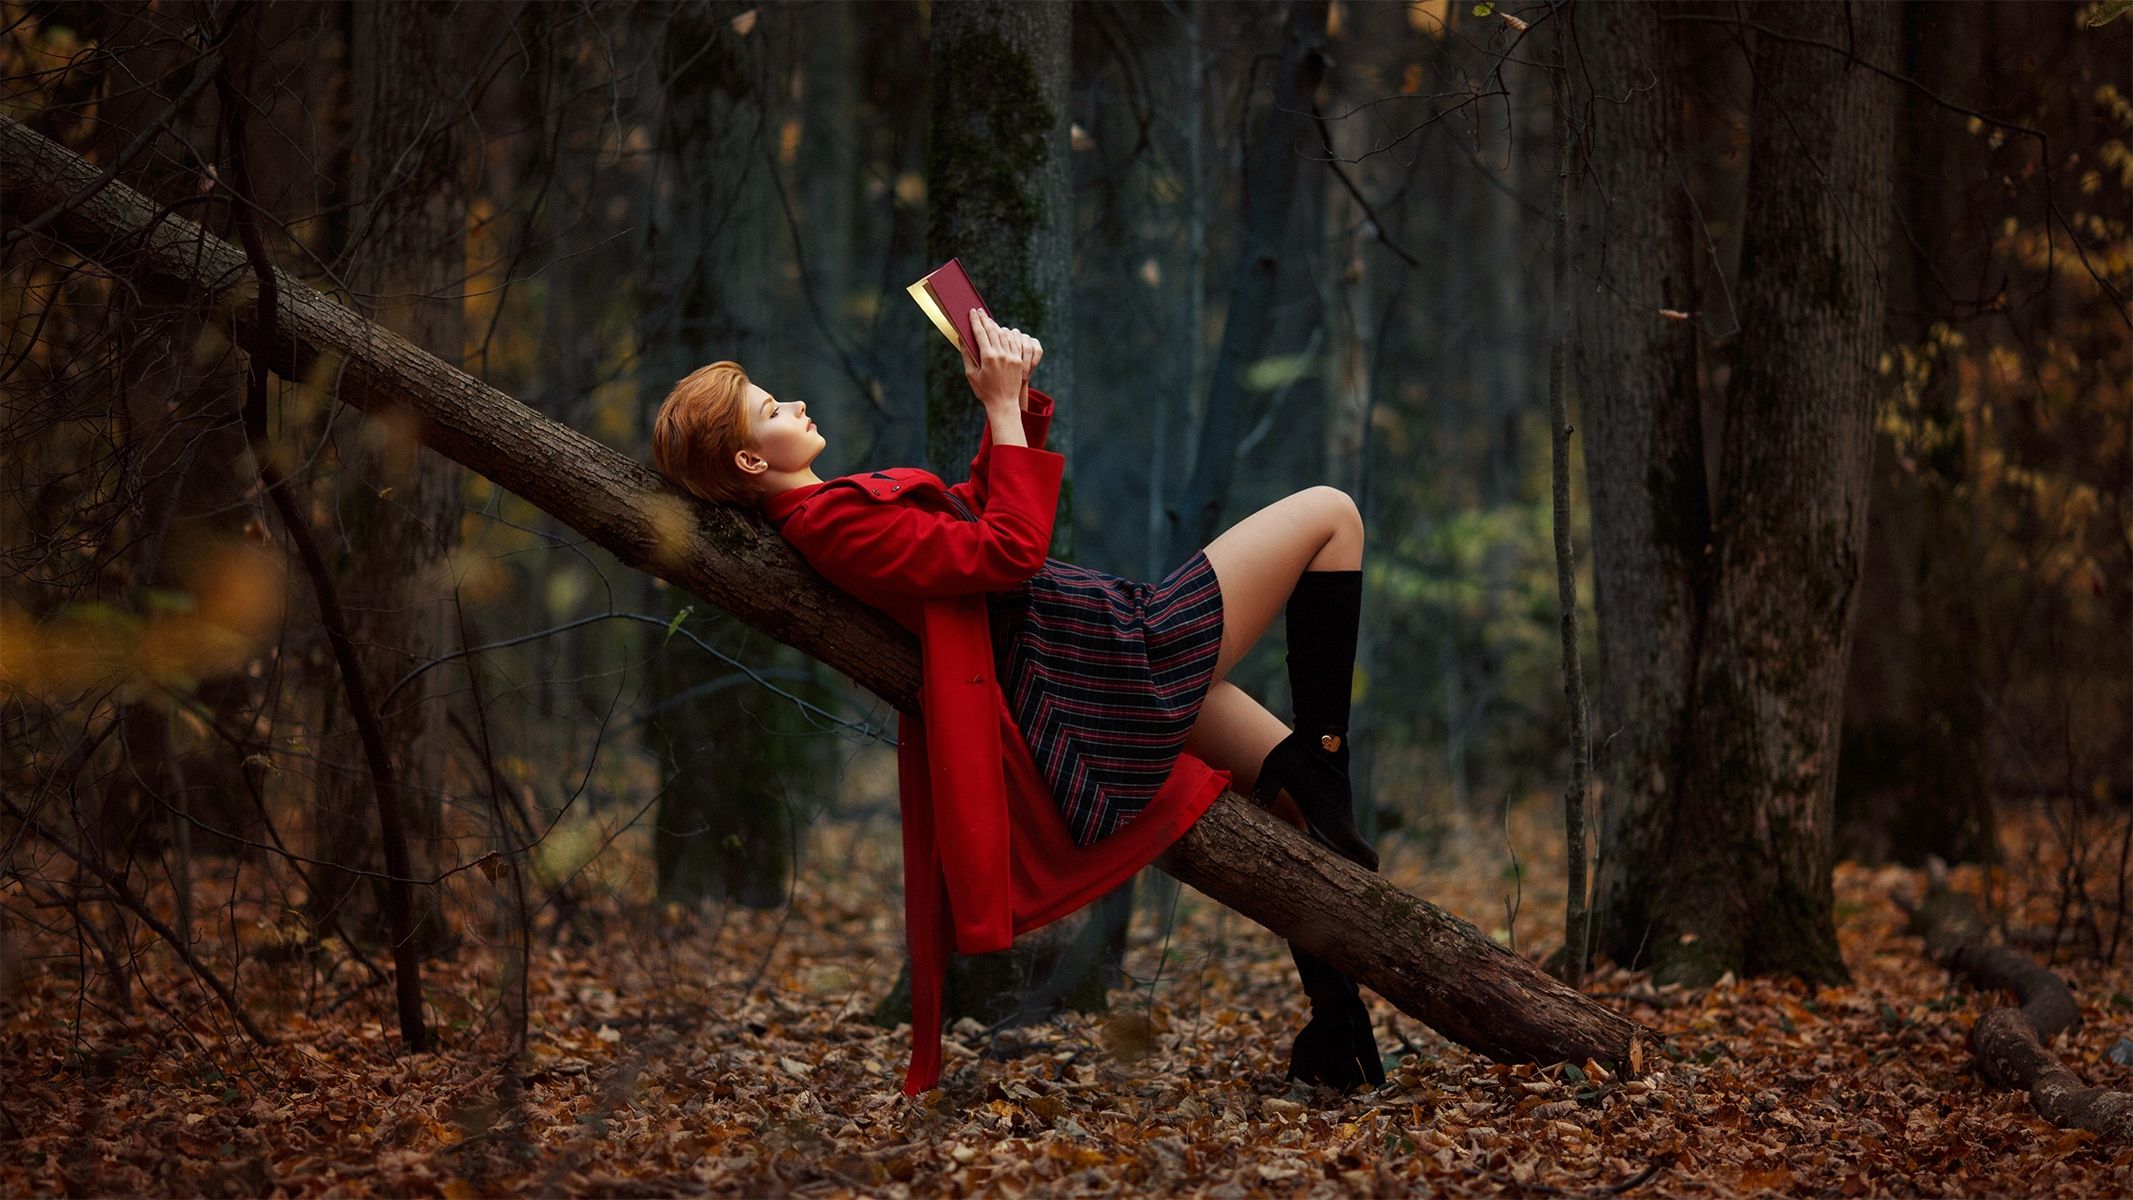 Anastasia Zhilina Women Model Redhead Profile Outdoors Forest Trees Log Coats Red Coat Dress Boots R Wallpaper:2133x1200